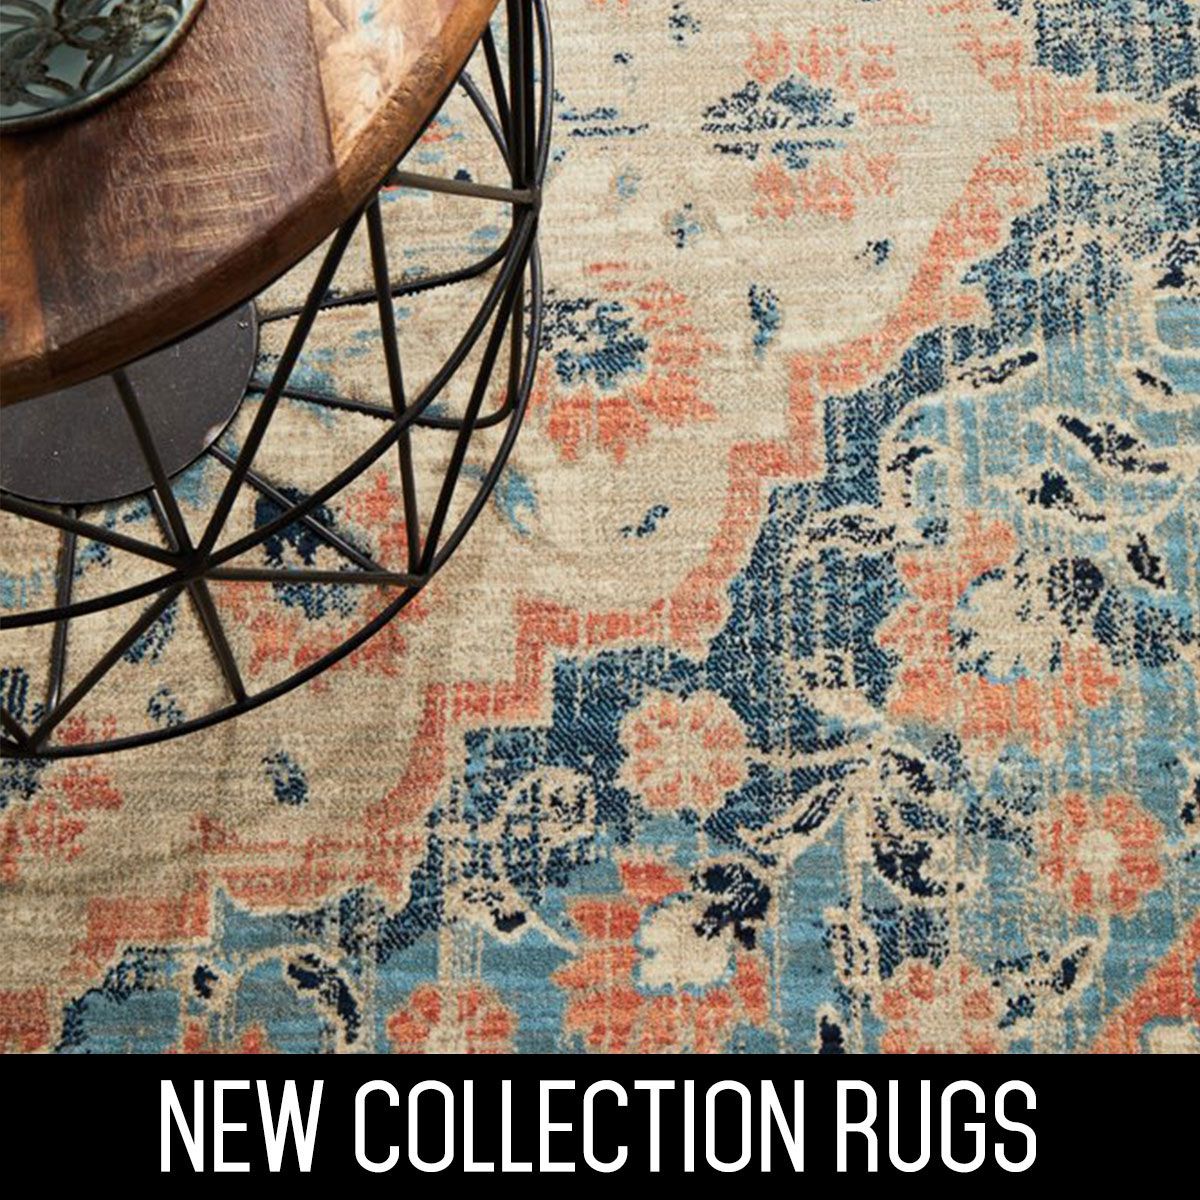 New Collection Rugs